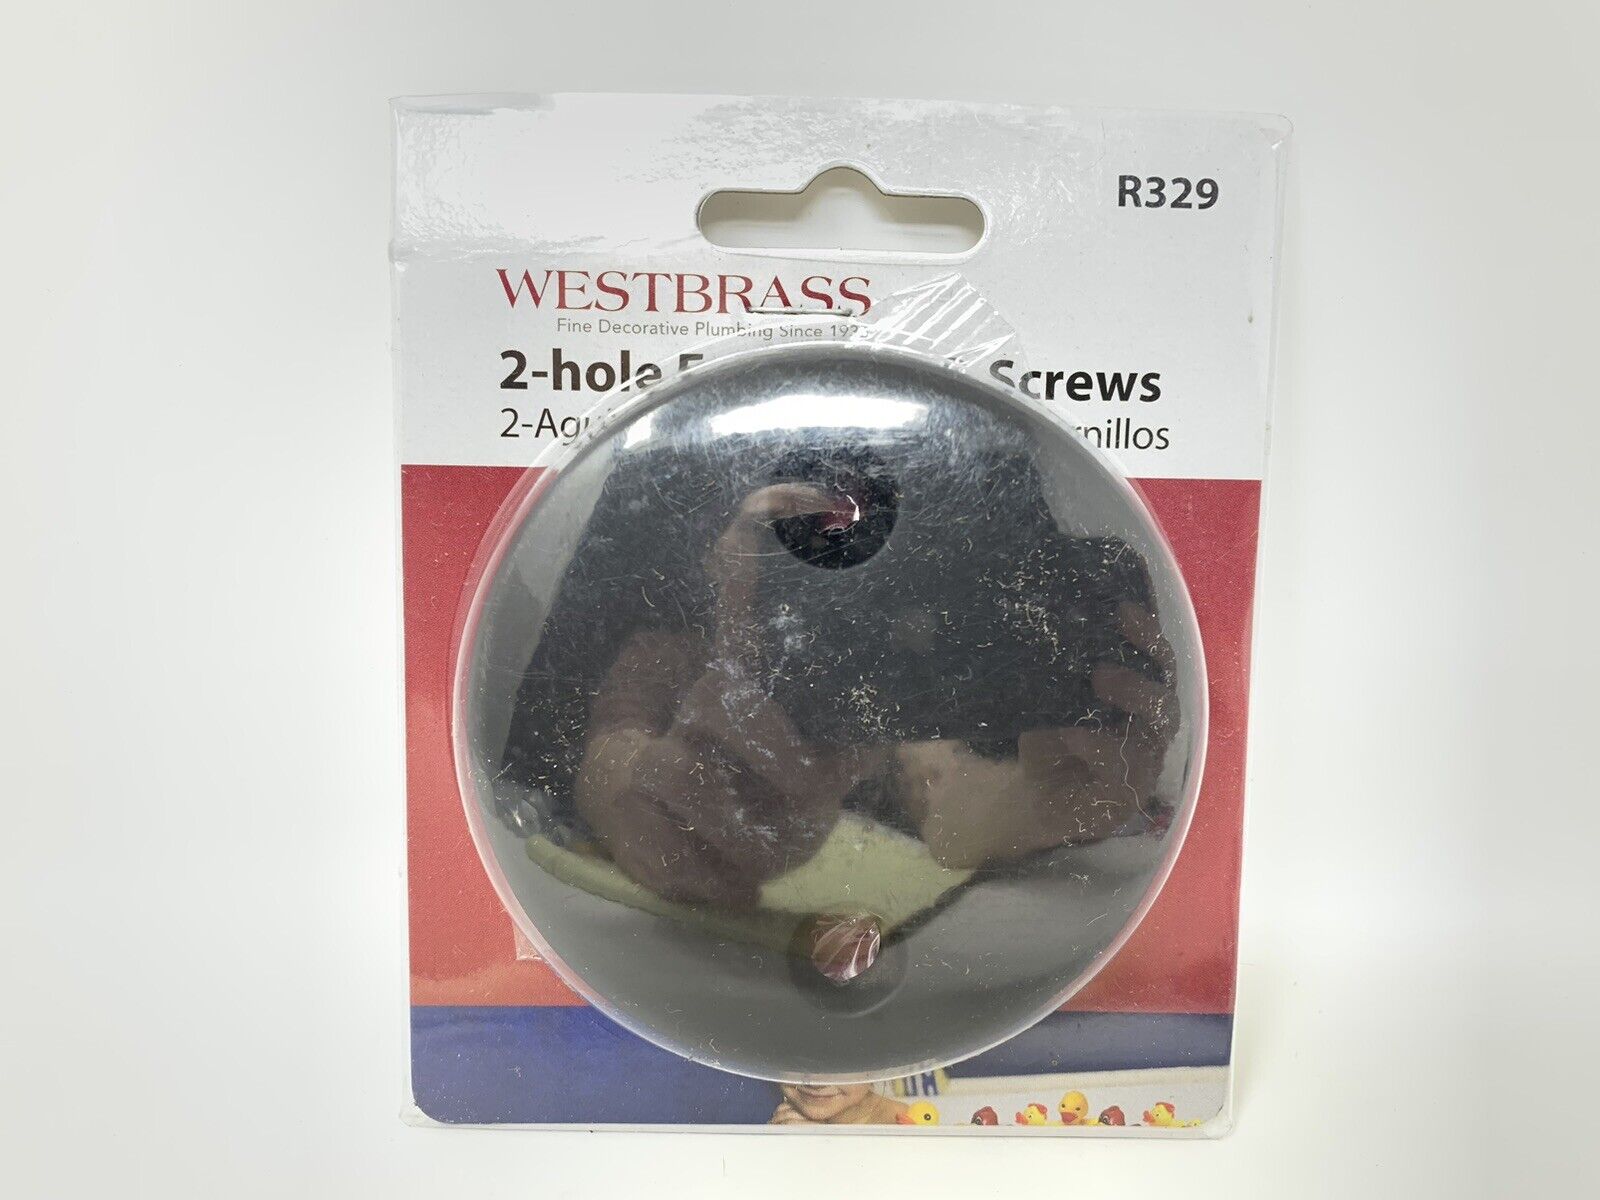 Westbrass Two-Hole Bathtub Overflow Faceplate and Screws R329-62 3-1/8